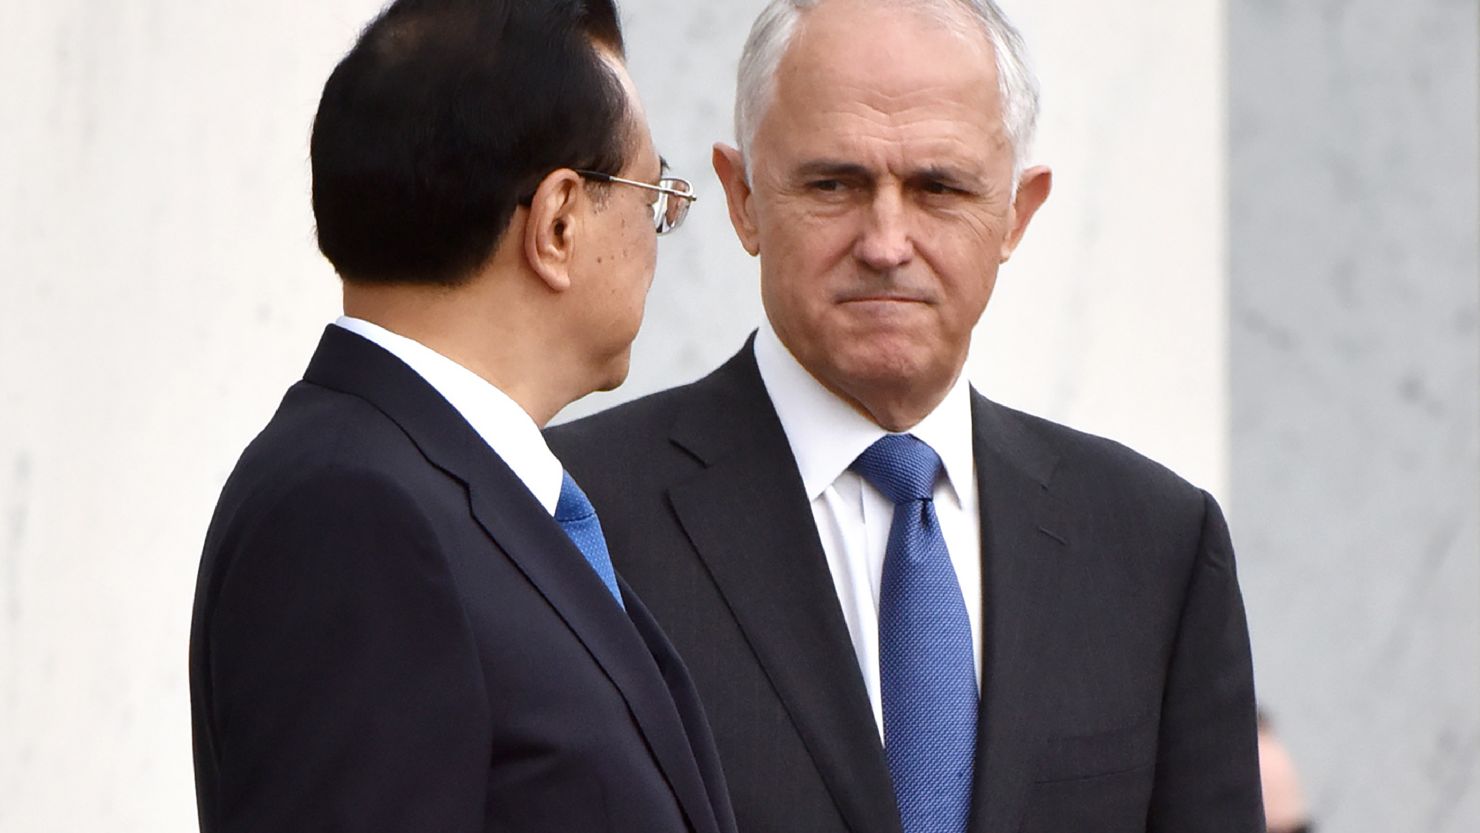 Australia's Prime Minister Malcolm Turnbull met with Chinese Premier Li Keqiang in Canberra Thursday.